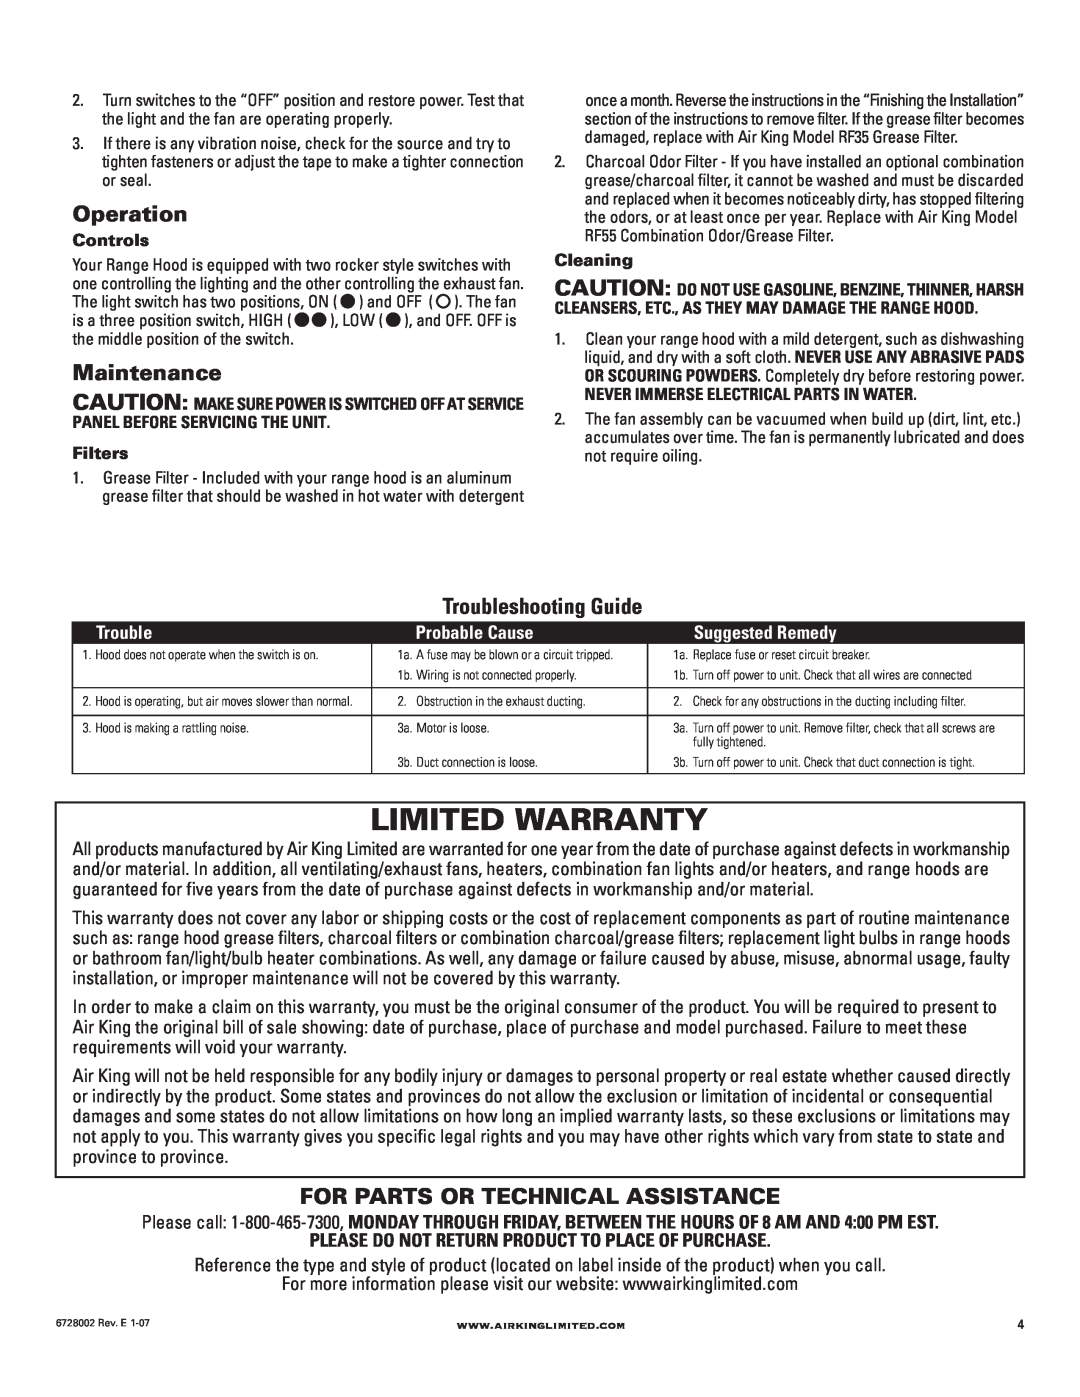 Air King Ventilation Hood manual Limited Warranty, Operation, Maintenance, Troubleshooting Guide, Probable Cause 